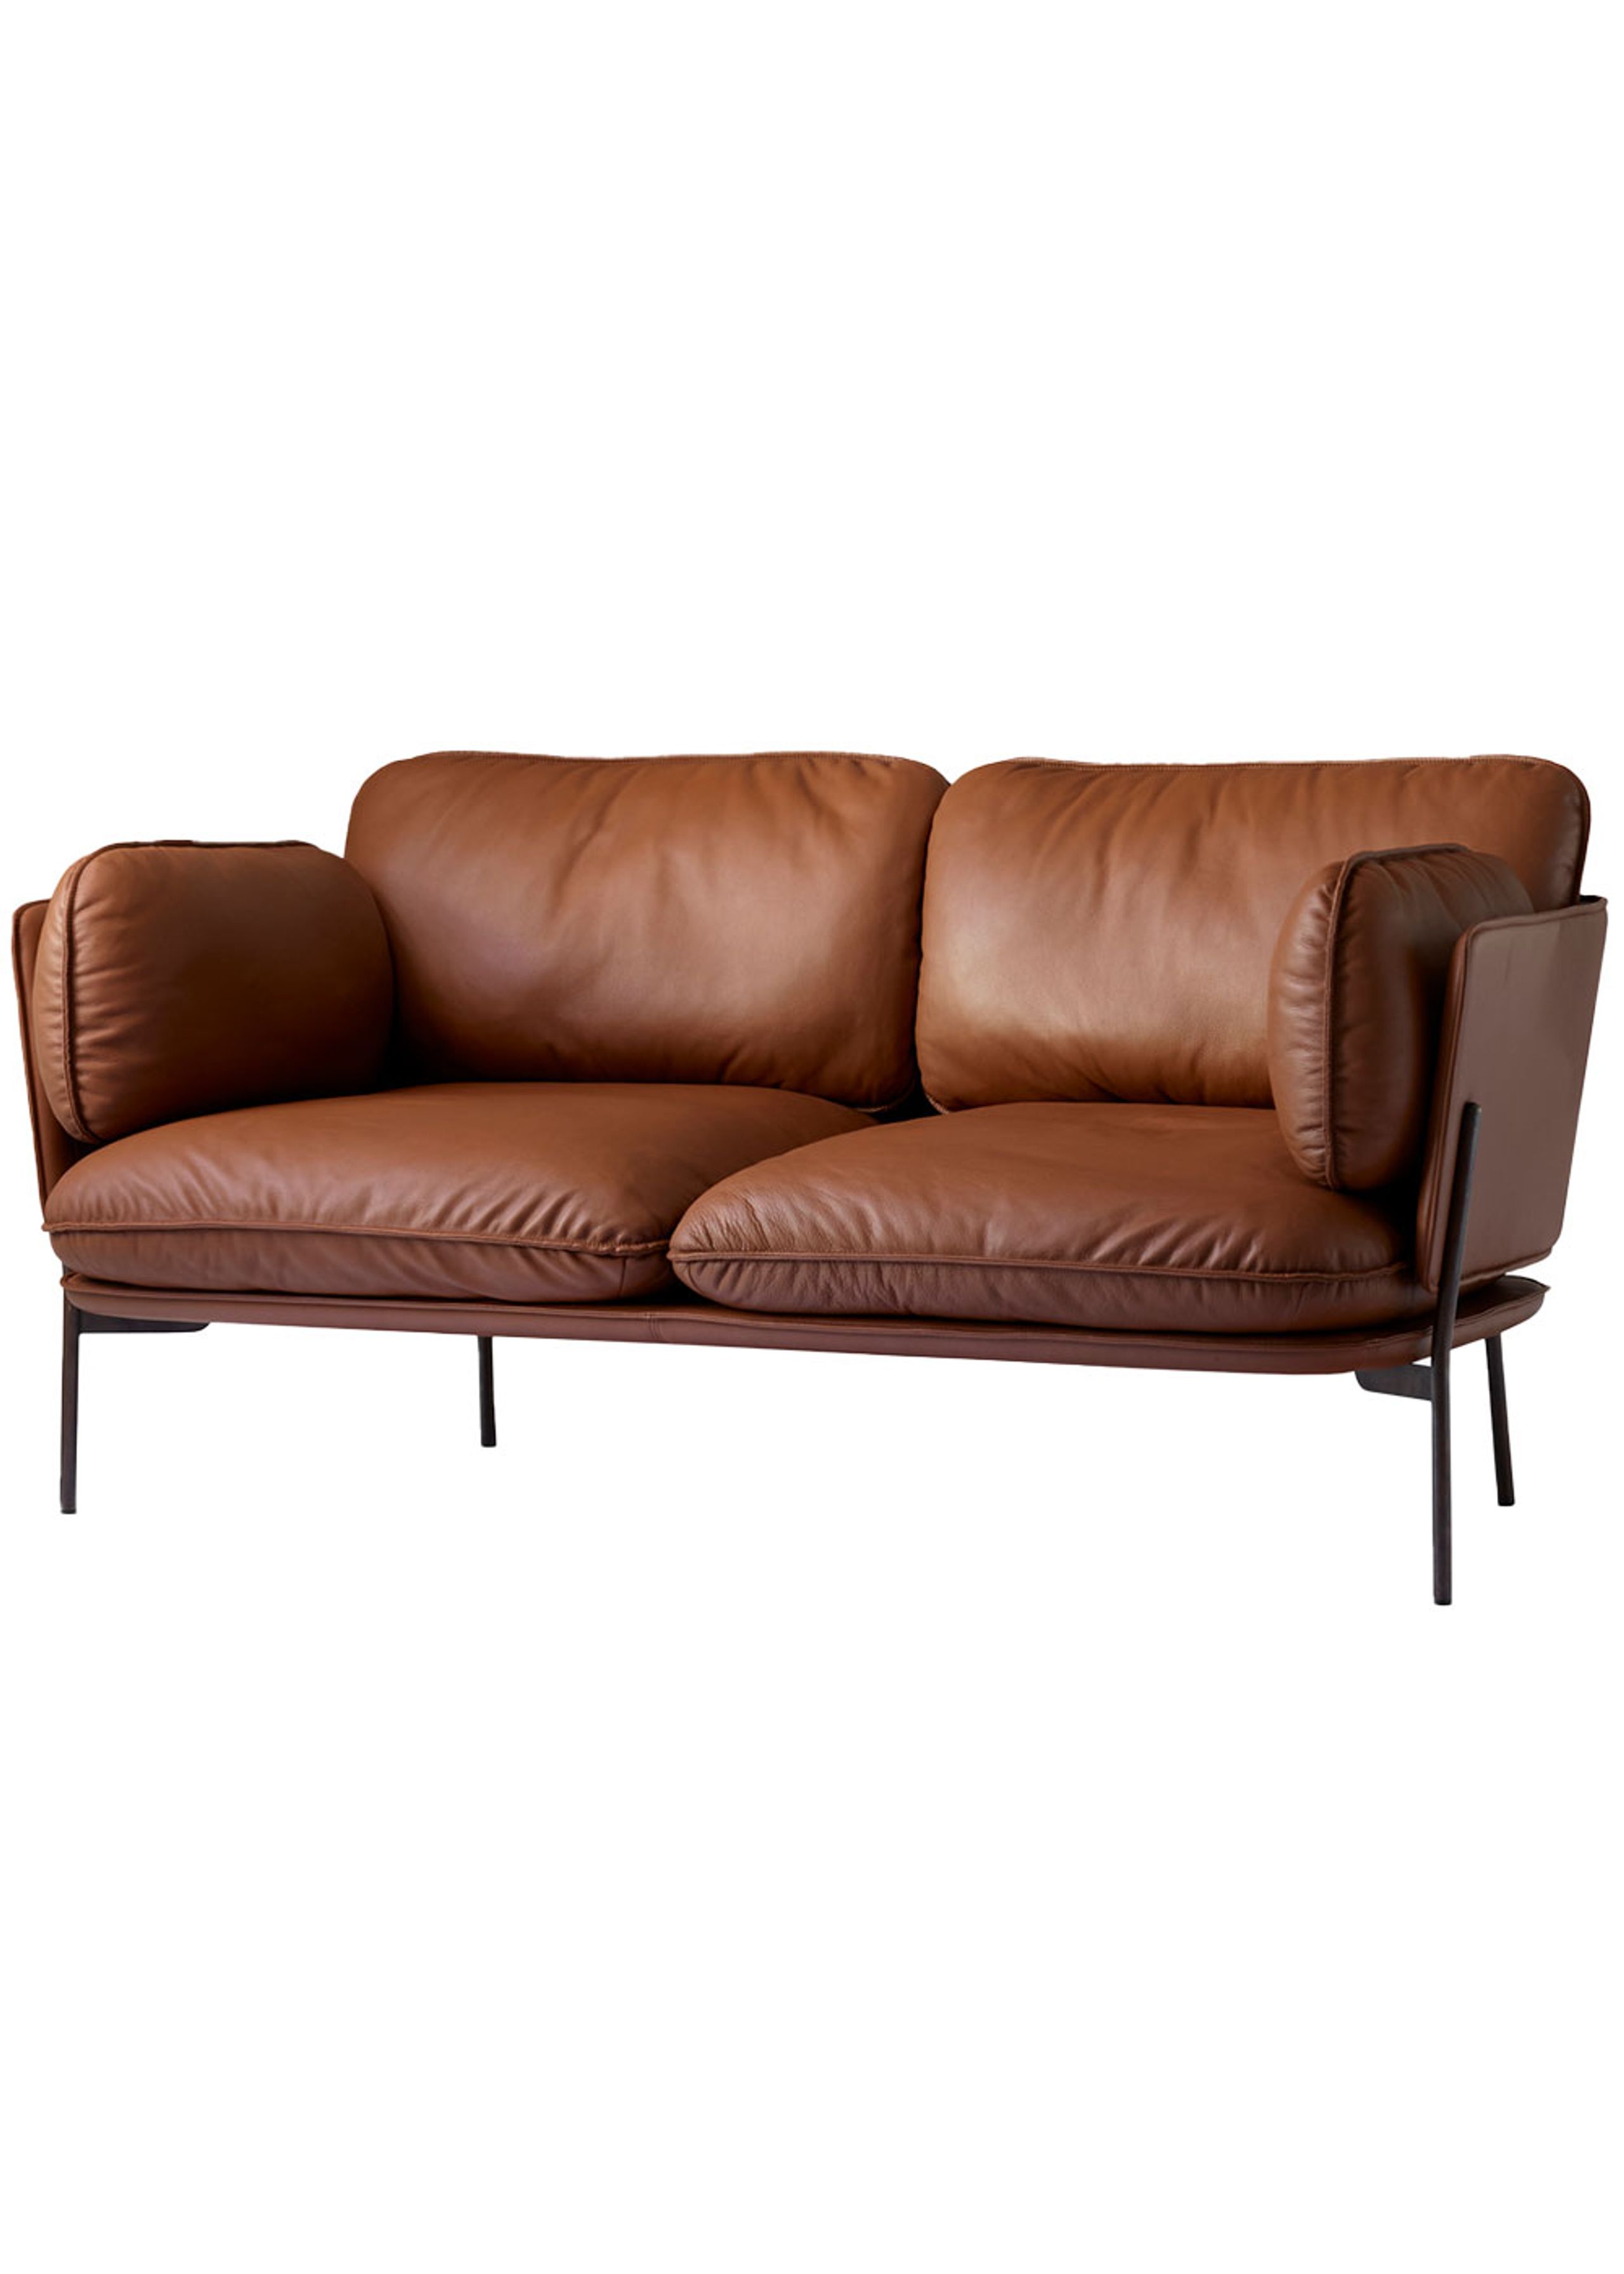 &tradition - Canapé - Cloud Sofa by Luca Nichetto / LN2 / LN3.2 - LN2 - Brown Noble Aniline Leather